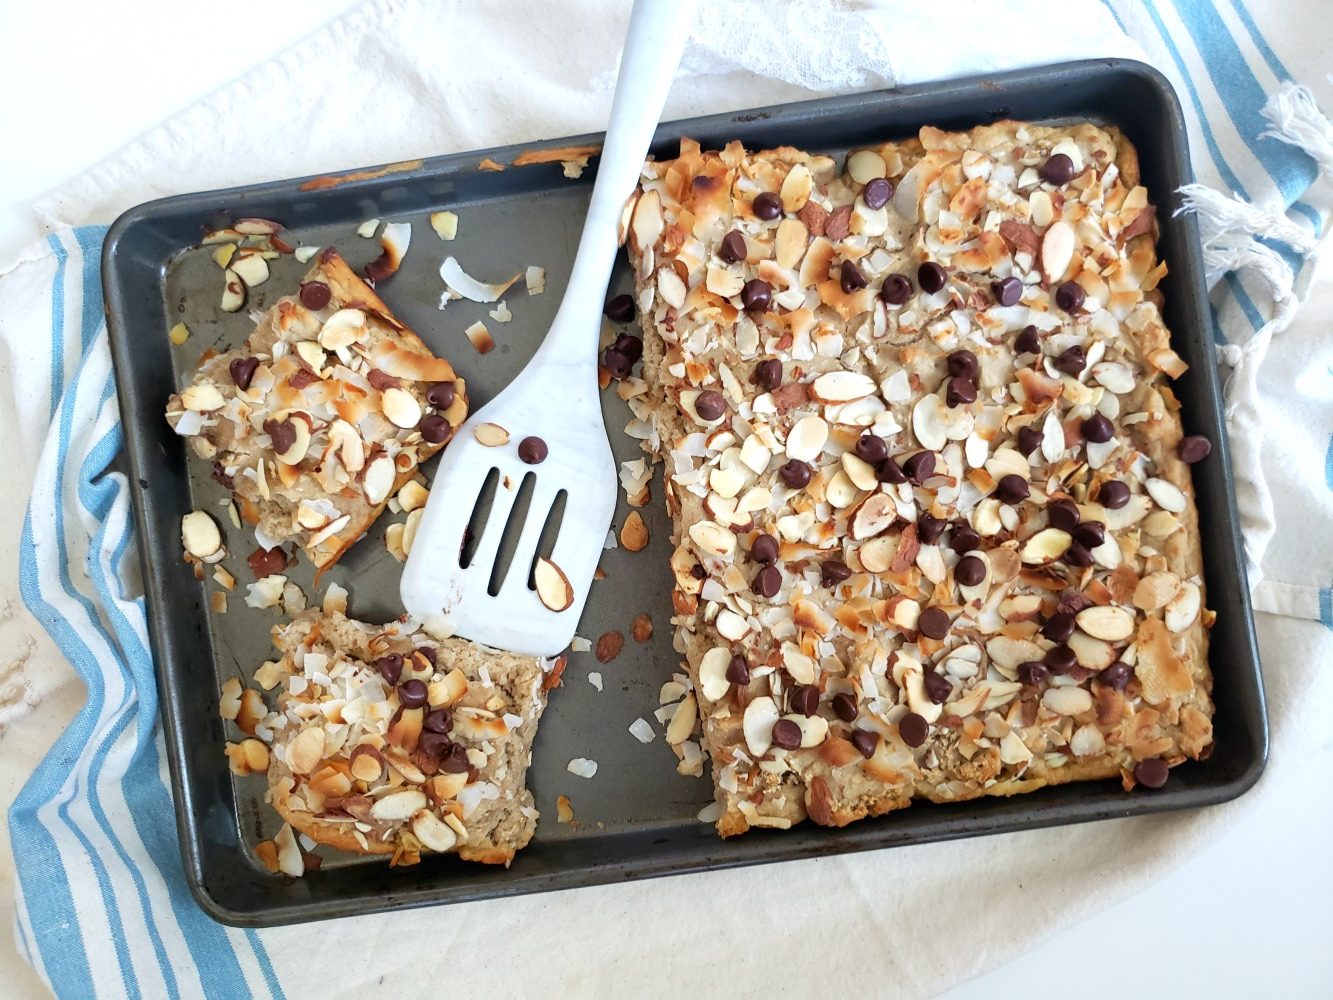 Almond Joy Sheet Pan Pancake - gluten free, vegan, no added sugar. Great for meal prep and make-ahead breakfast for a large group.